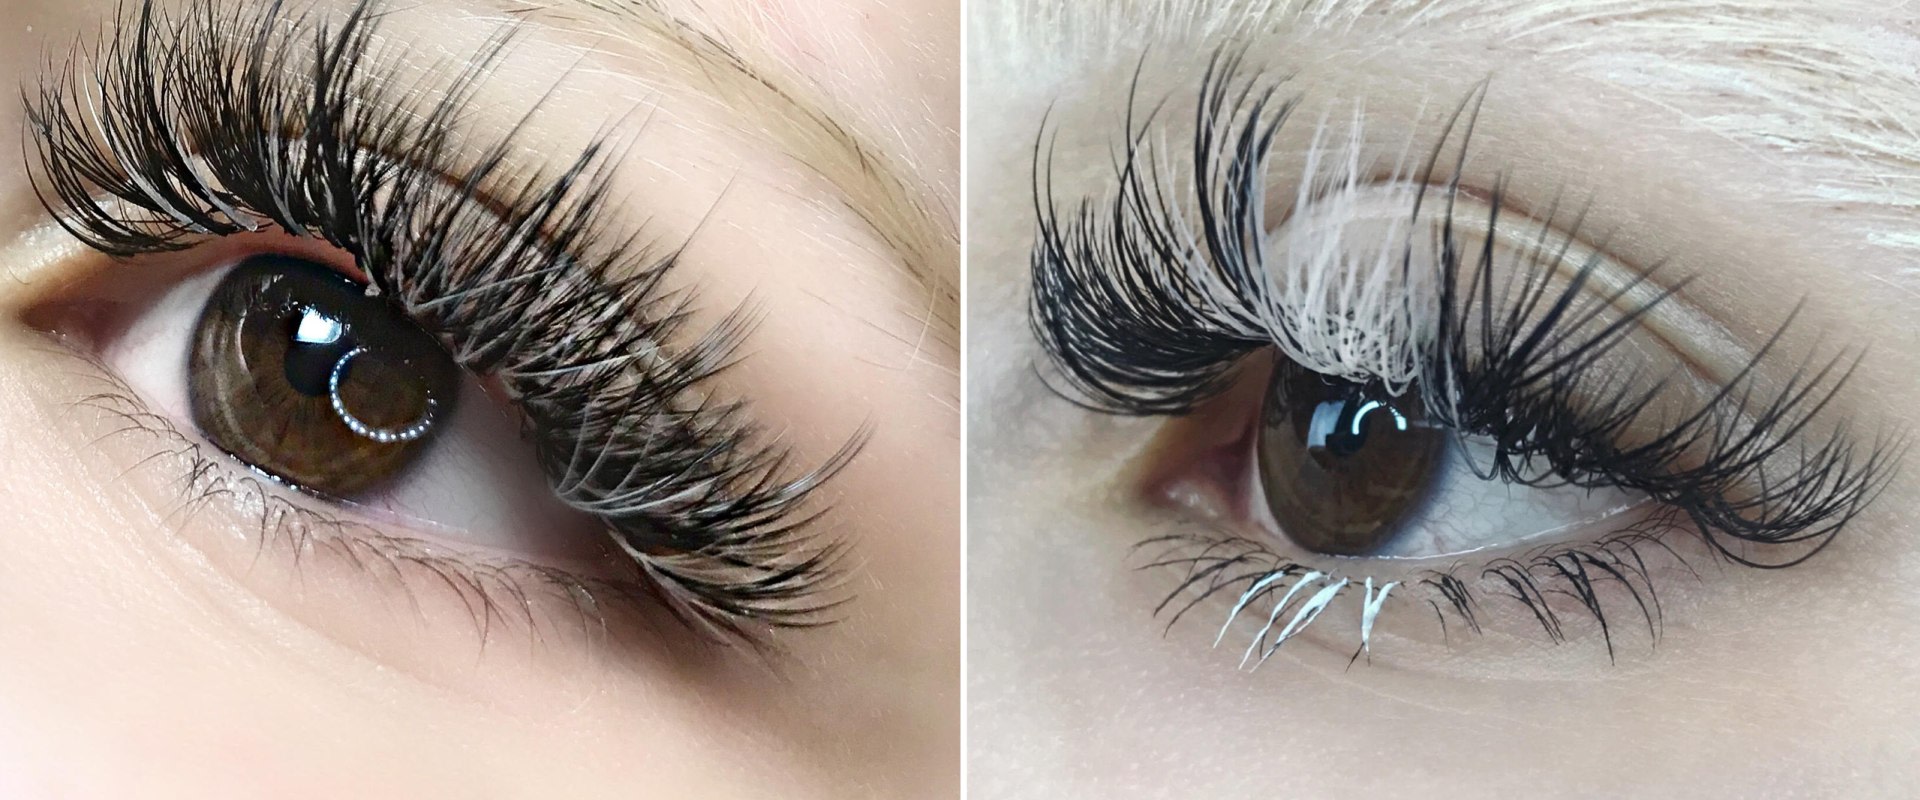 How to do wispy eyelash extensions?